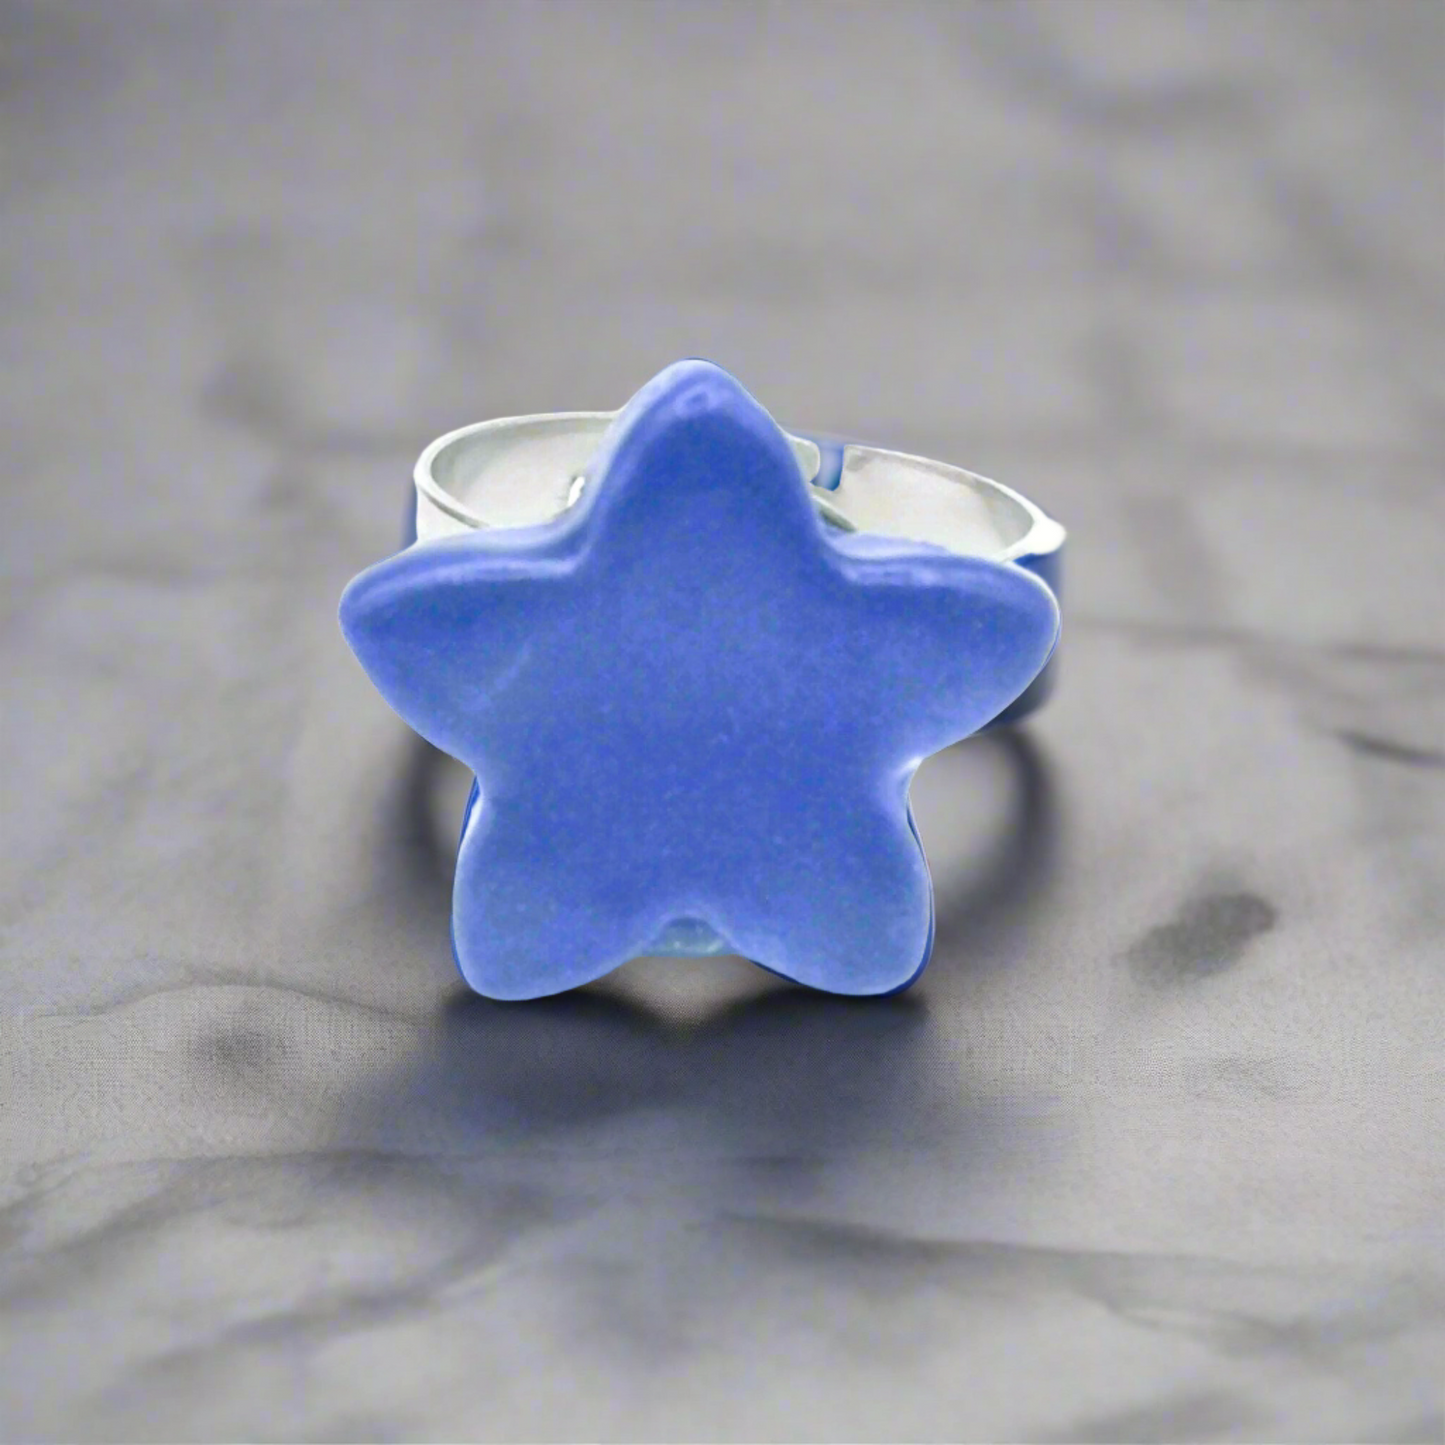 Handmade Ceramic Blue Star Statement Ring For Women, Stainless Steel Adjustable Ring, Porcelain Best 9th Anniversary Gifts For Her